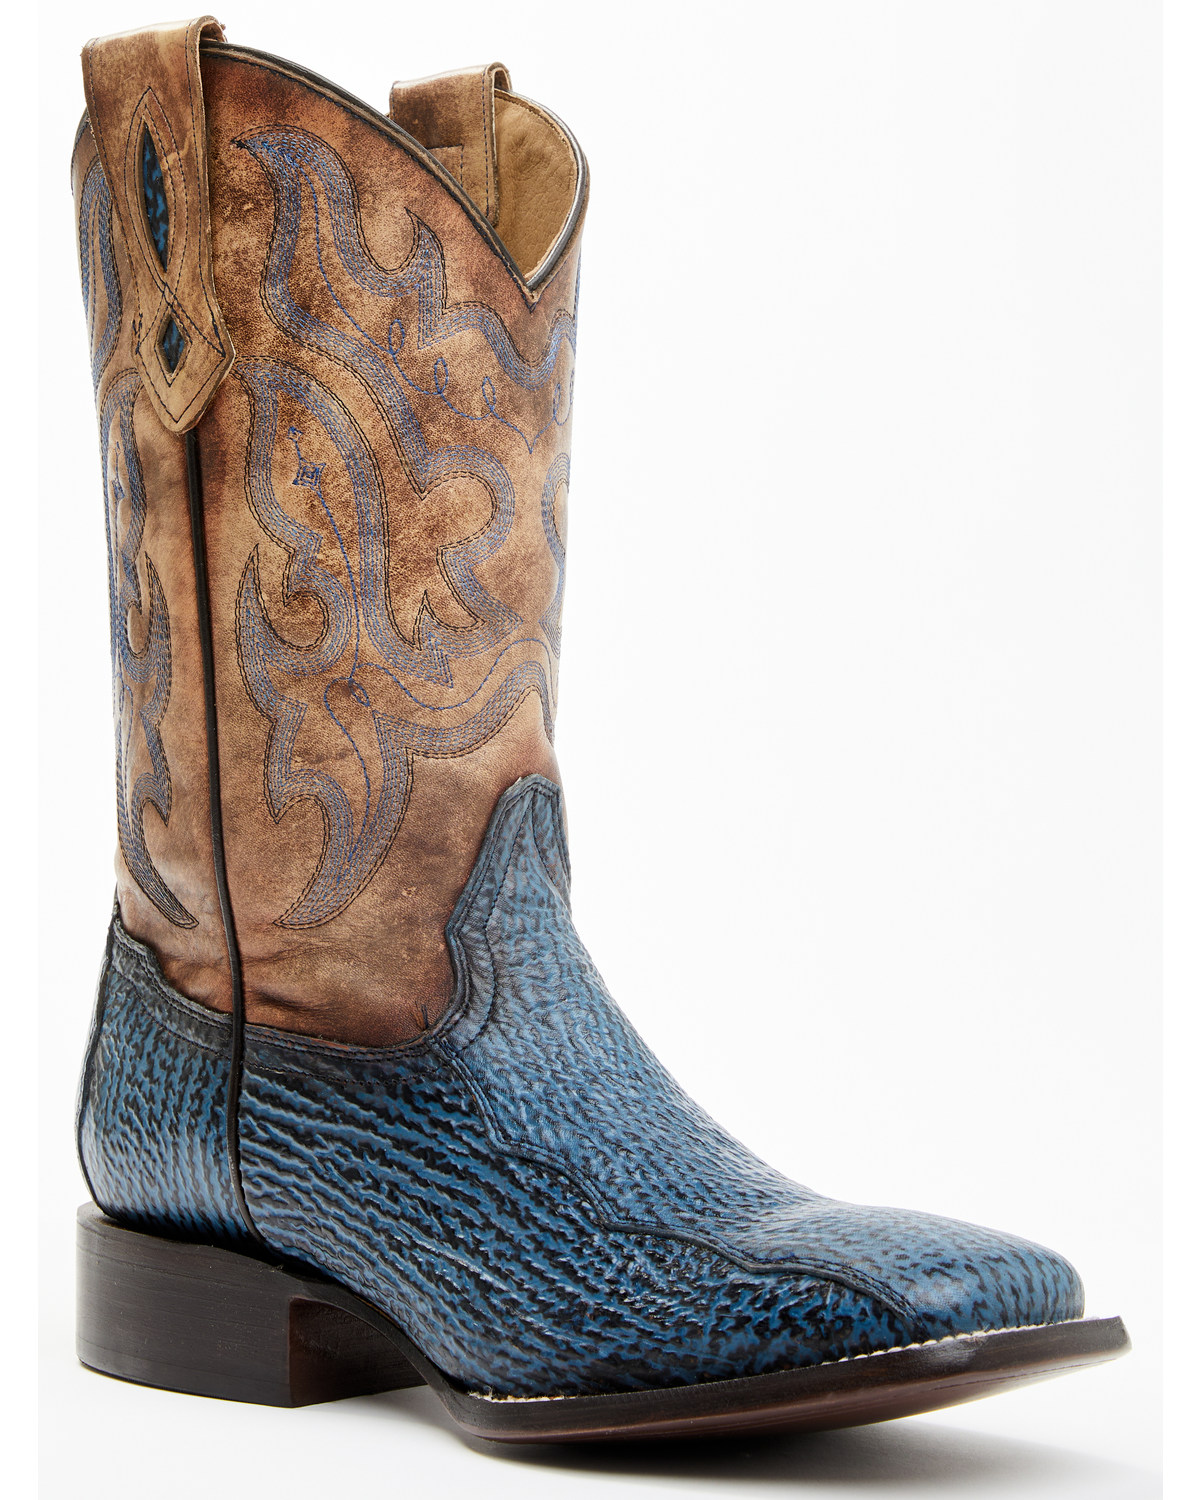 Cody James Men's Exotic Shark Western Boots - Broad Square Toe